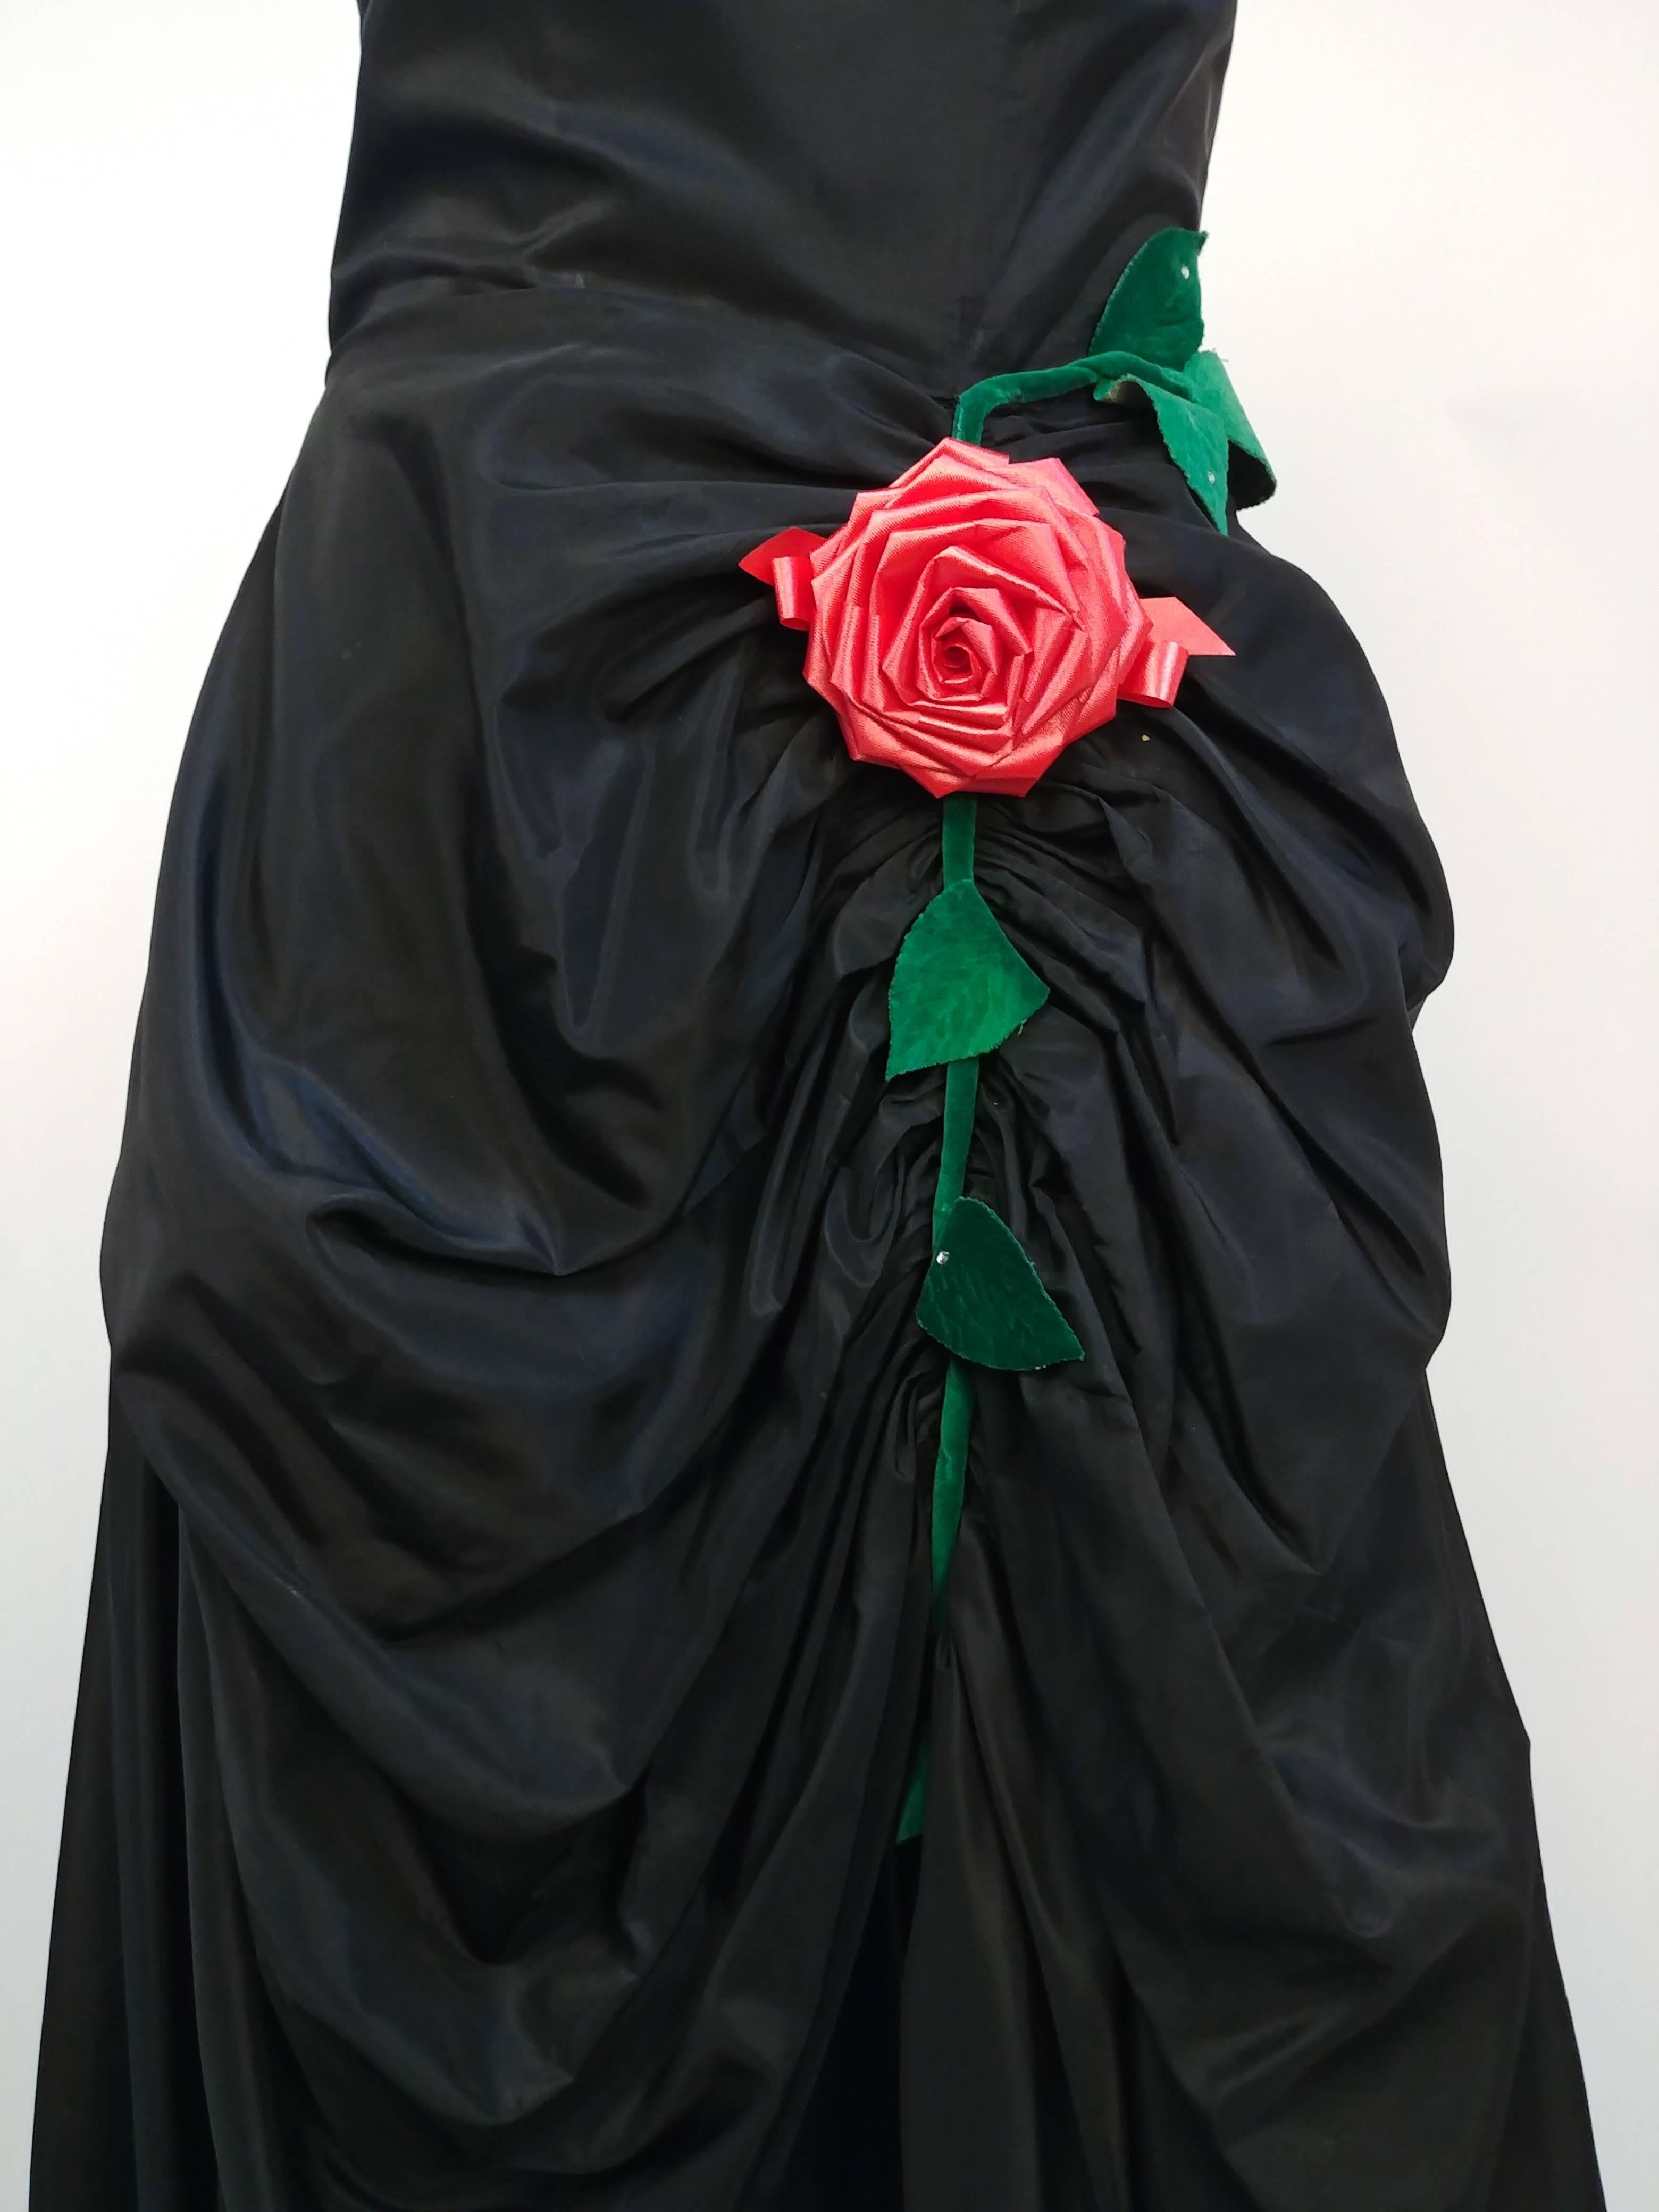 1950s Black Ruched Front Rose Embellishment Gown. Black taffeta fabric drapes down the front beautifully to create dimension and drama in this floor-length, stunning gown, further embellished with a single large ribbon rose and velvet leaves.